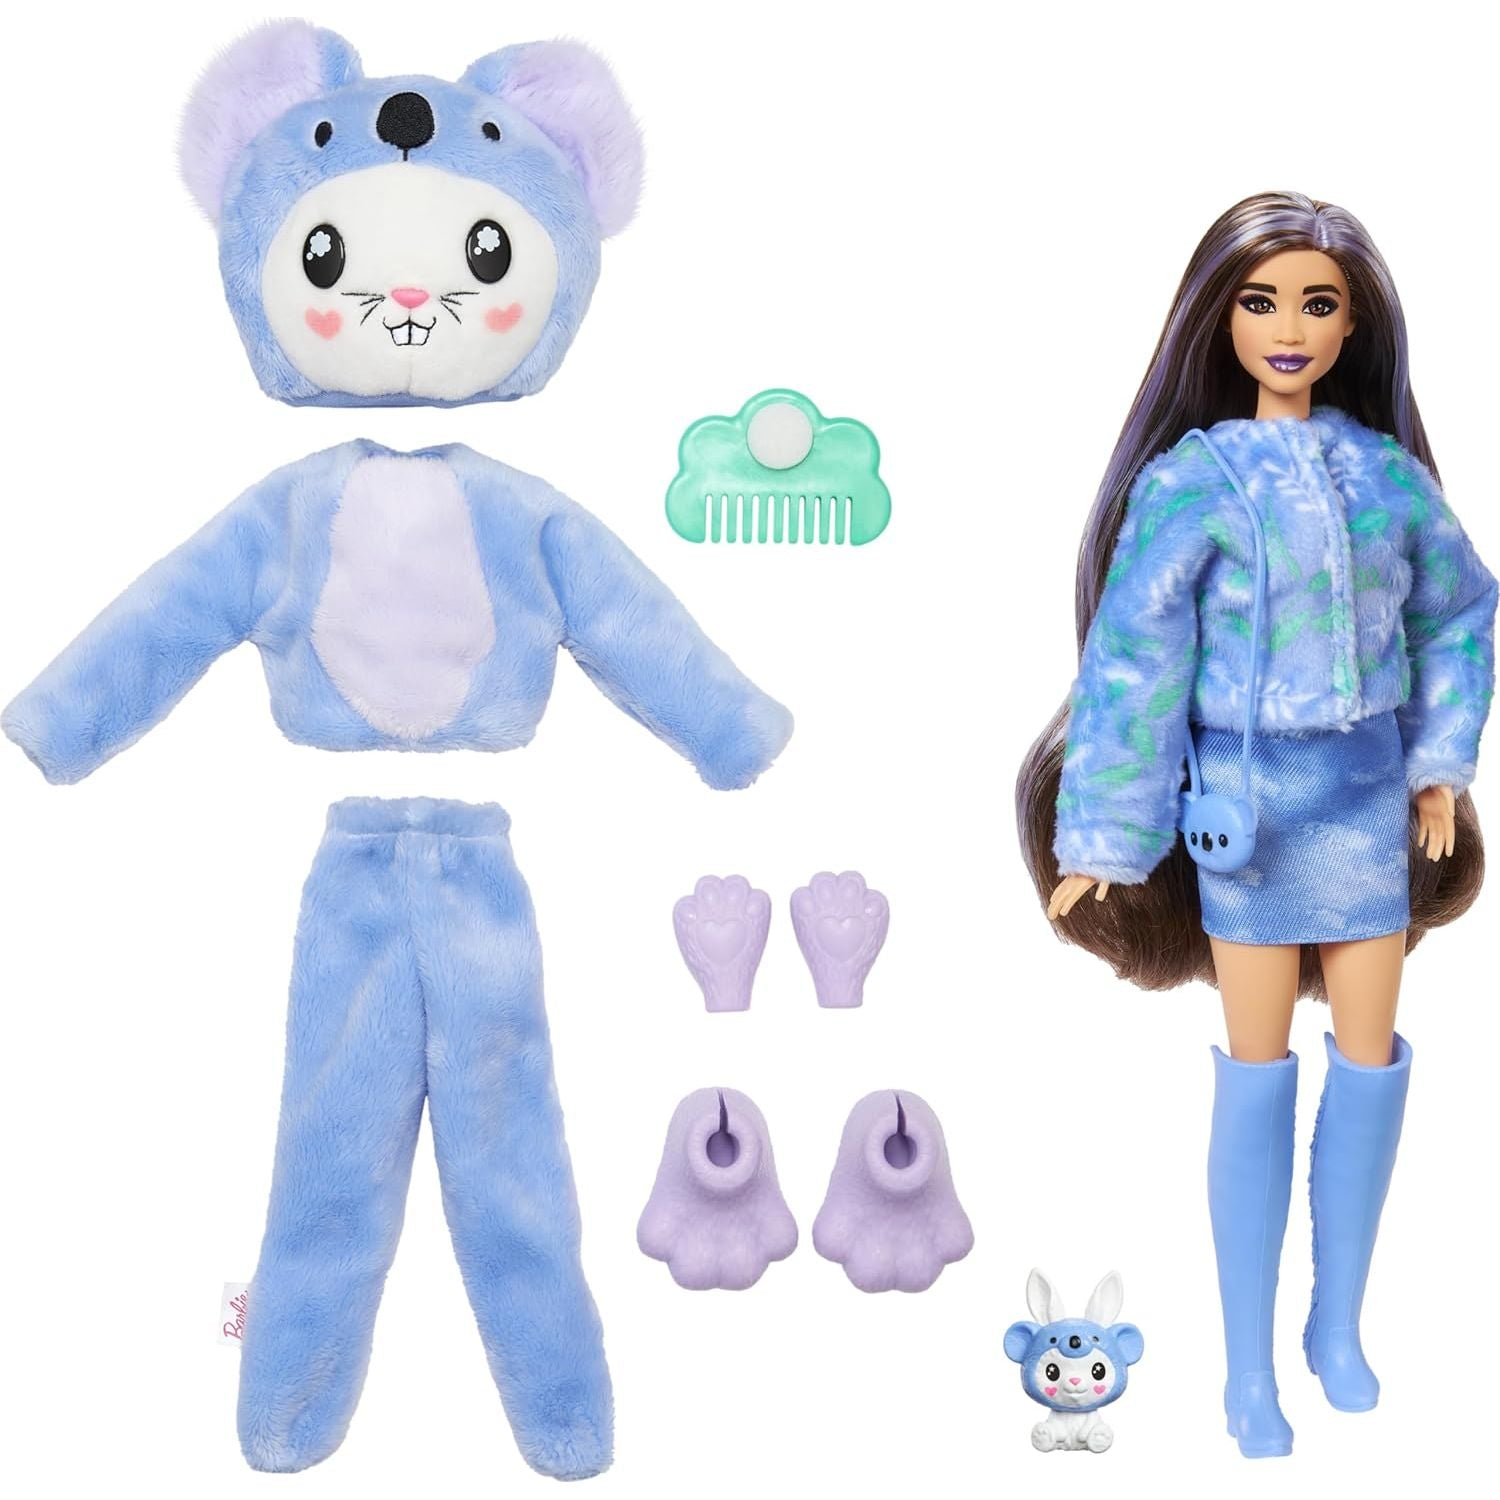 Barbie Cutie Reveal Doll & Accessories with Animal Plush Costume & 10 Surprises Including Color Change Easter Basket Stuffers, Bunny as a Koala in Costume-Themed Series